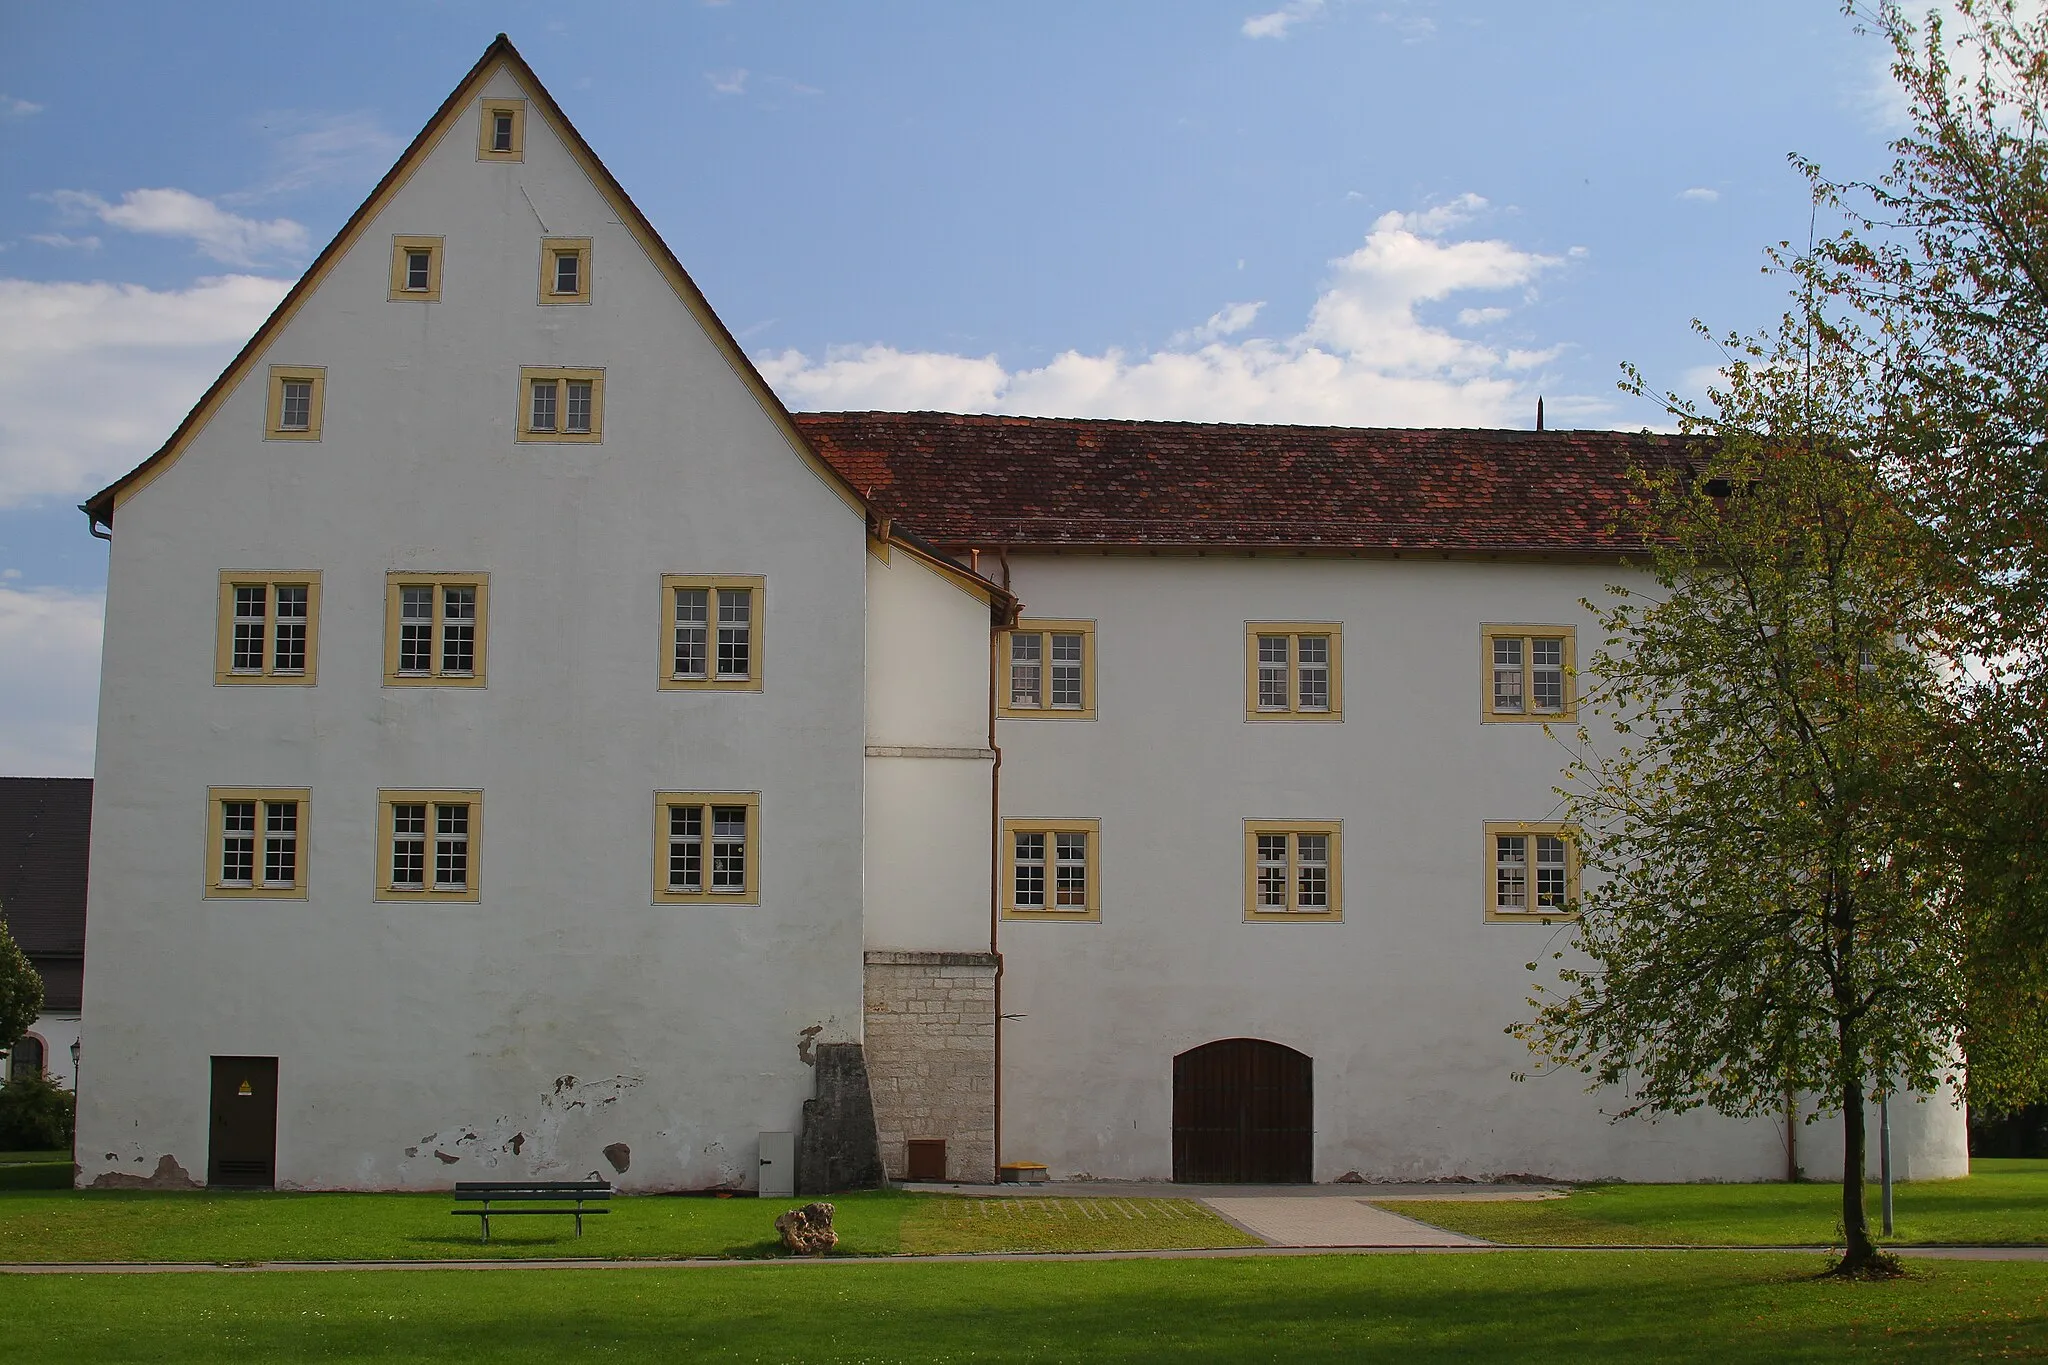 Photo showing: "Oberes Schloss" (used as Cityhall) of Immendingen